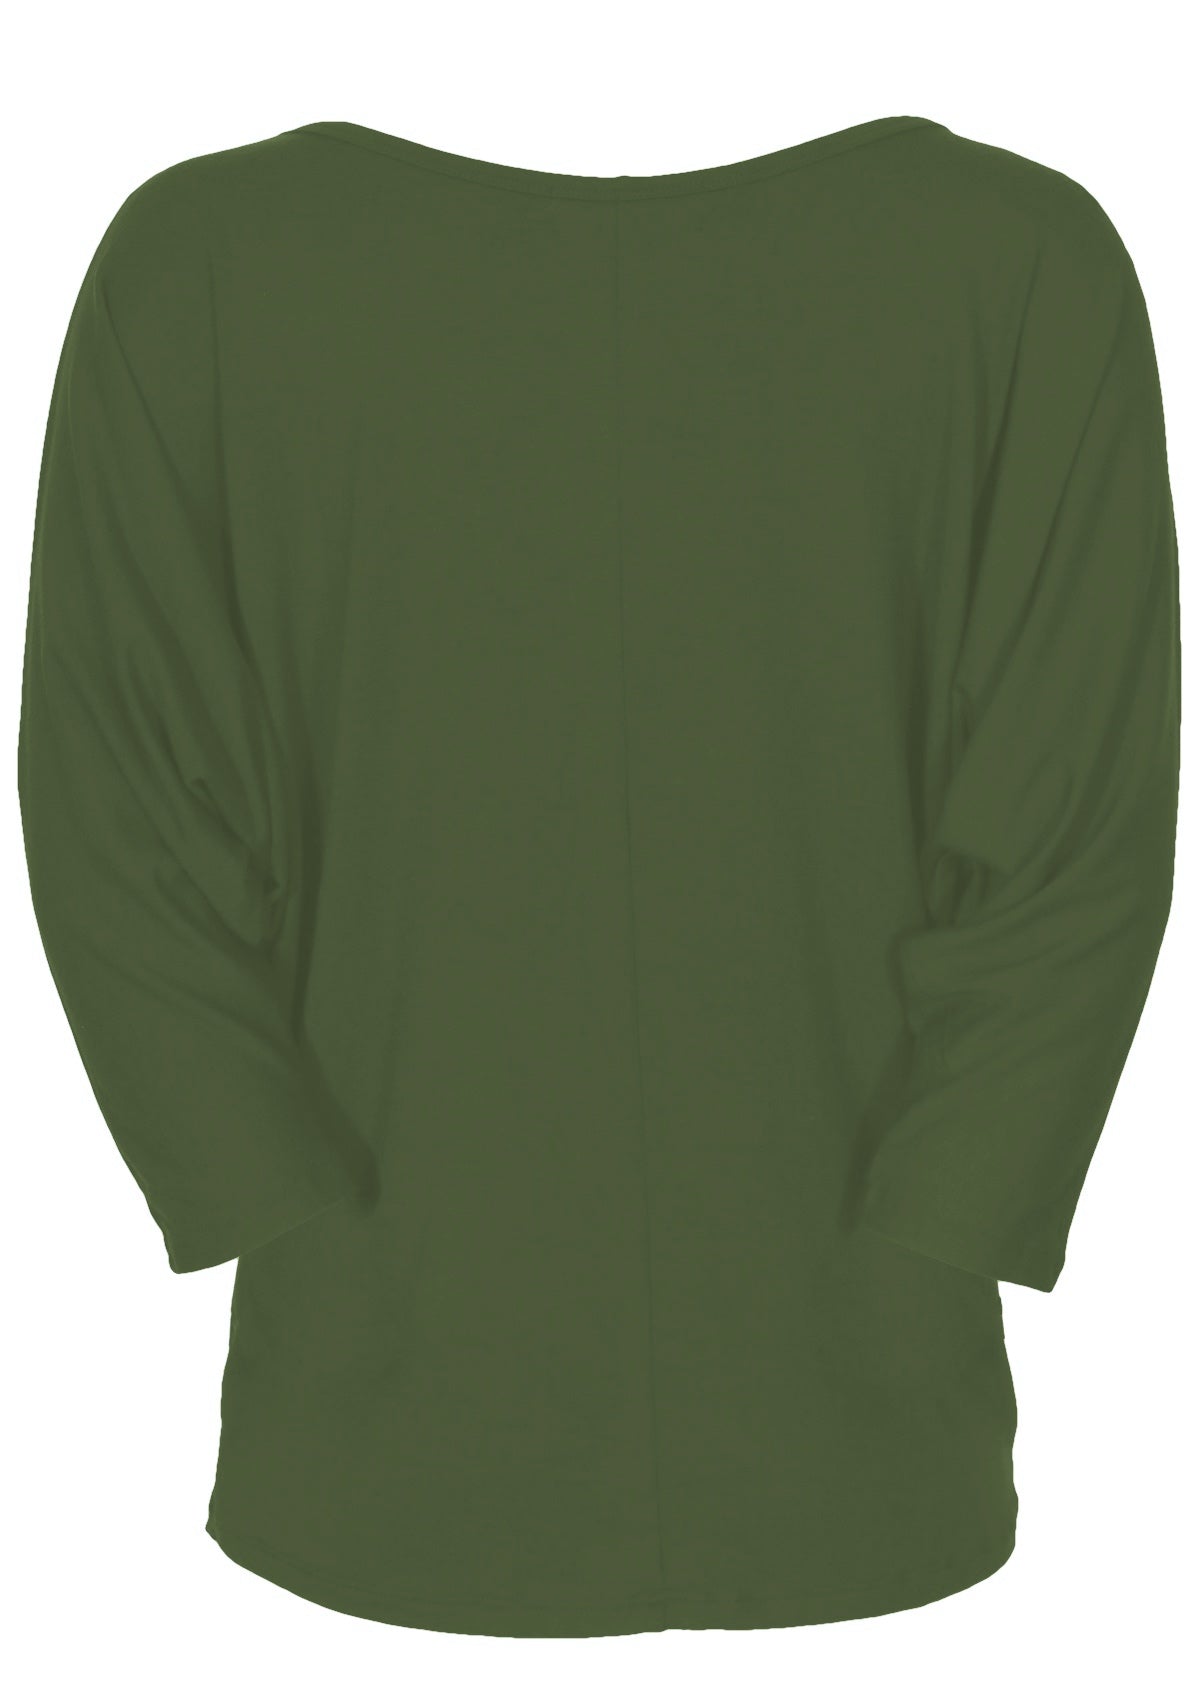 Back view of women's 3/4 sleeve rayon batwing round neckline olive green top.